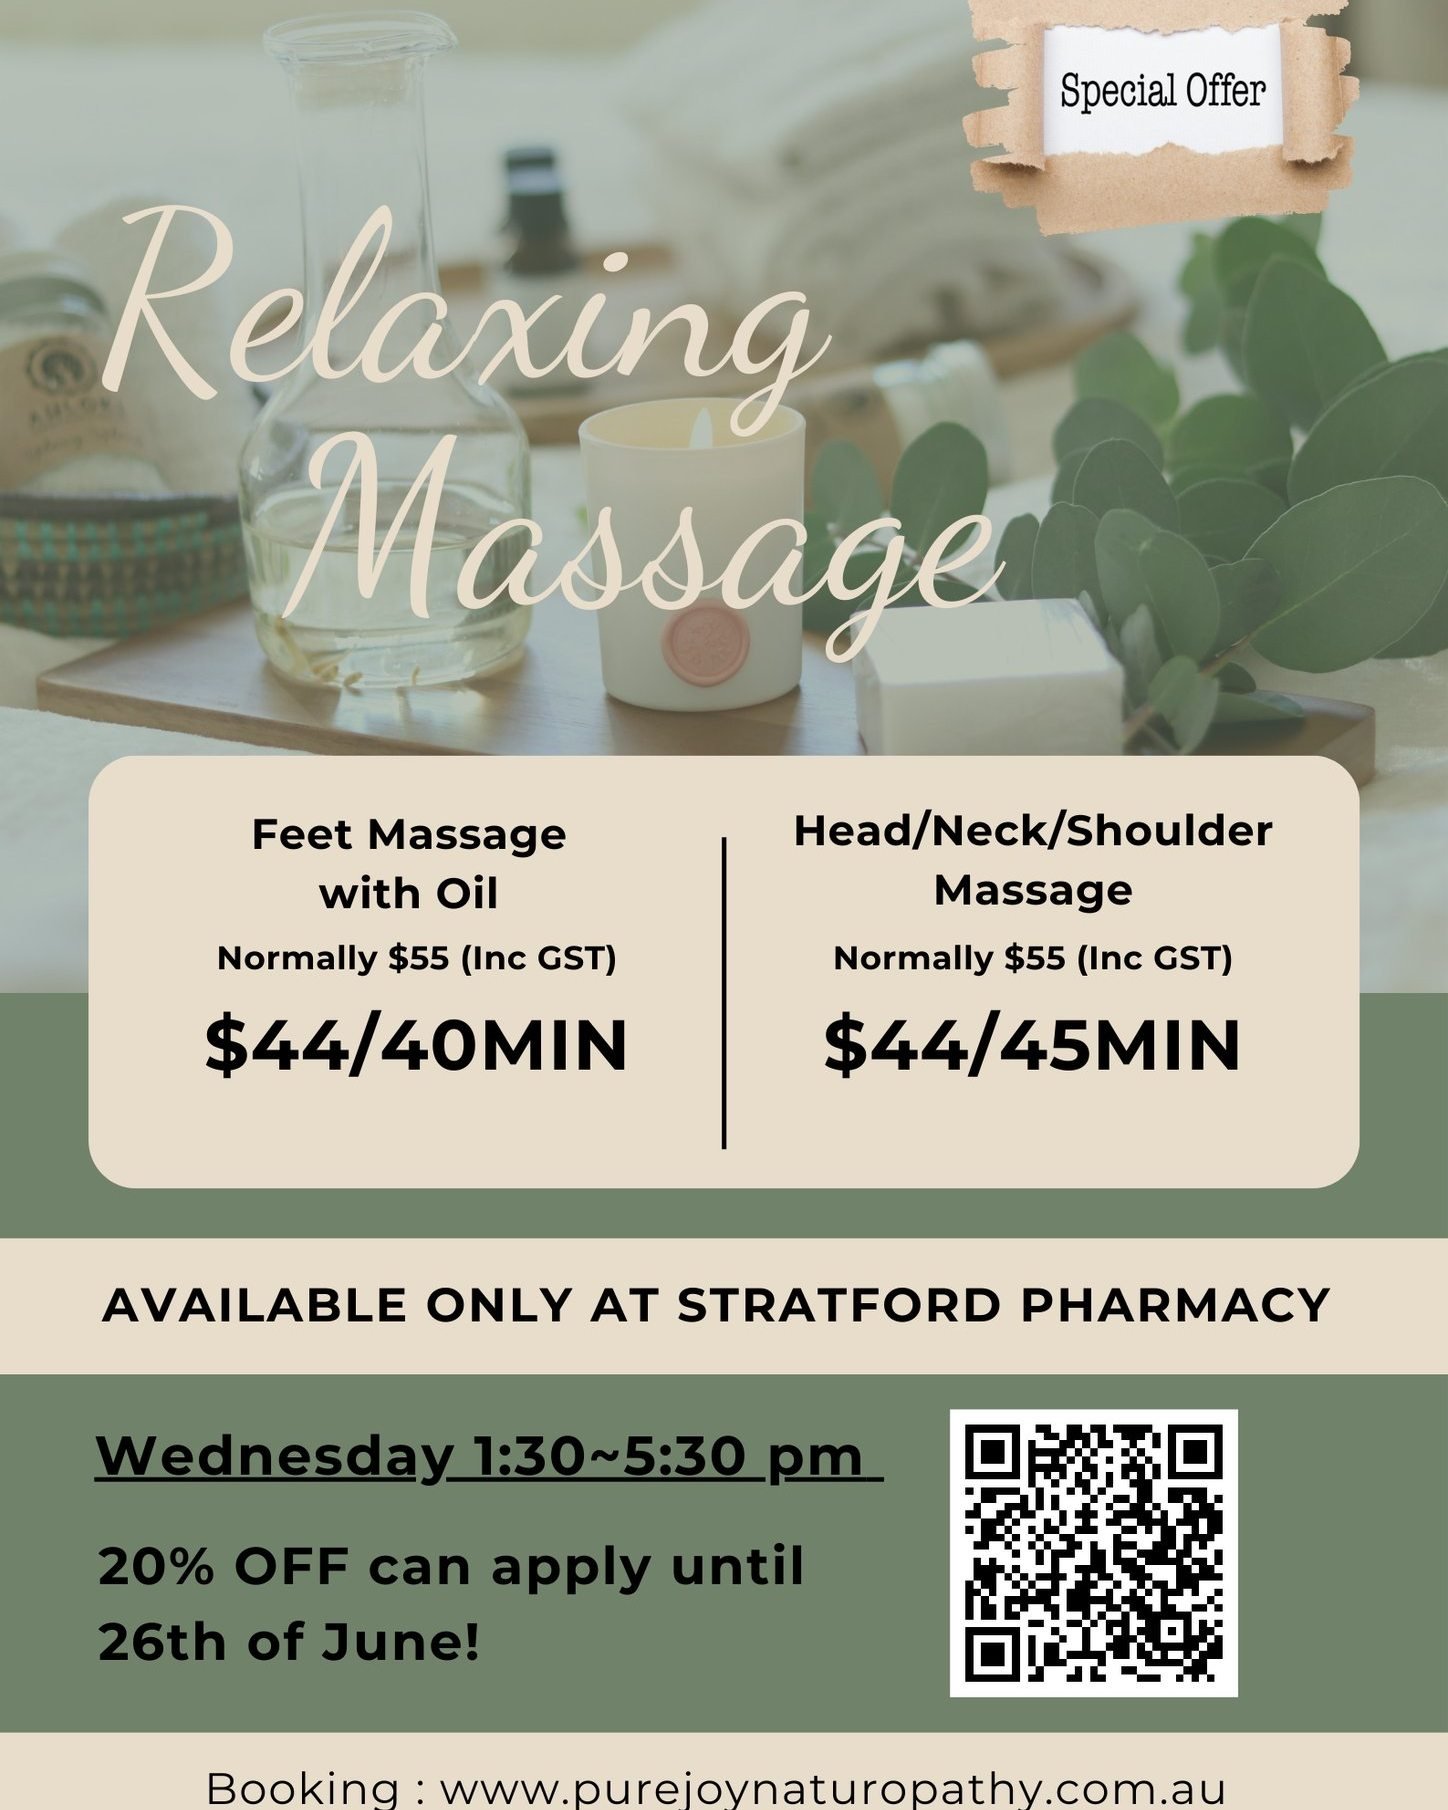 Special promotion Stratford Village Pharmacy starting tomorrow! 

If you are feeling stressed and want to release tension, a relaxing massage will help you immensely.

It is also a great opportunity for us to connect and get to know you as a natural 